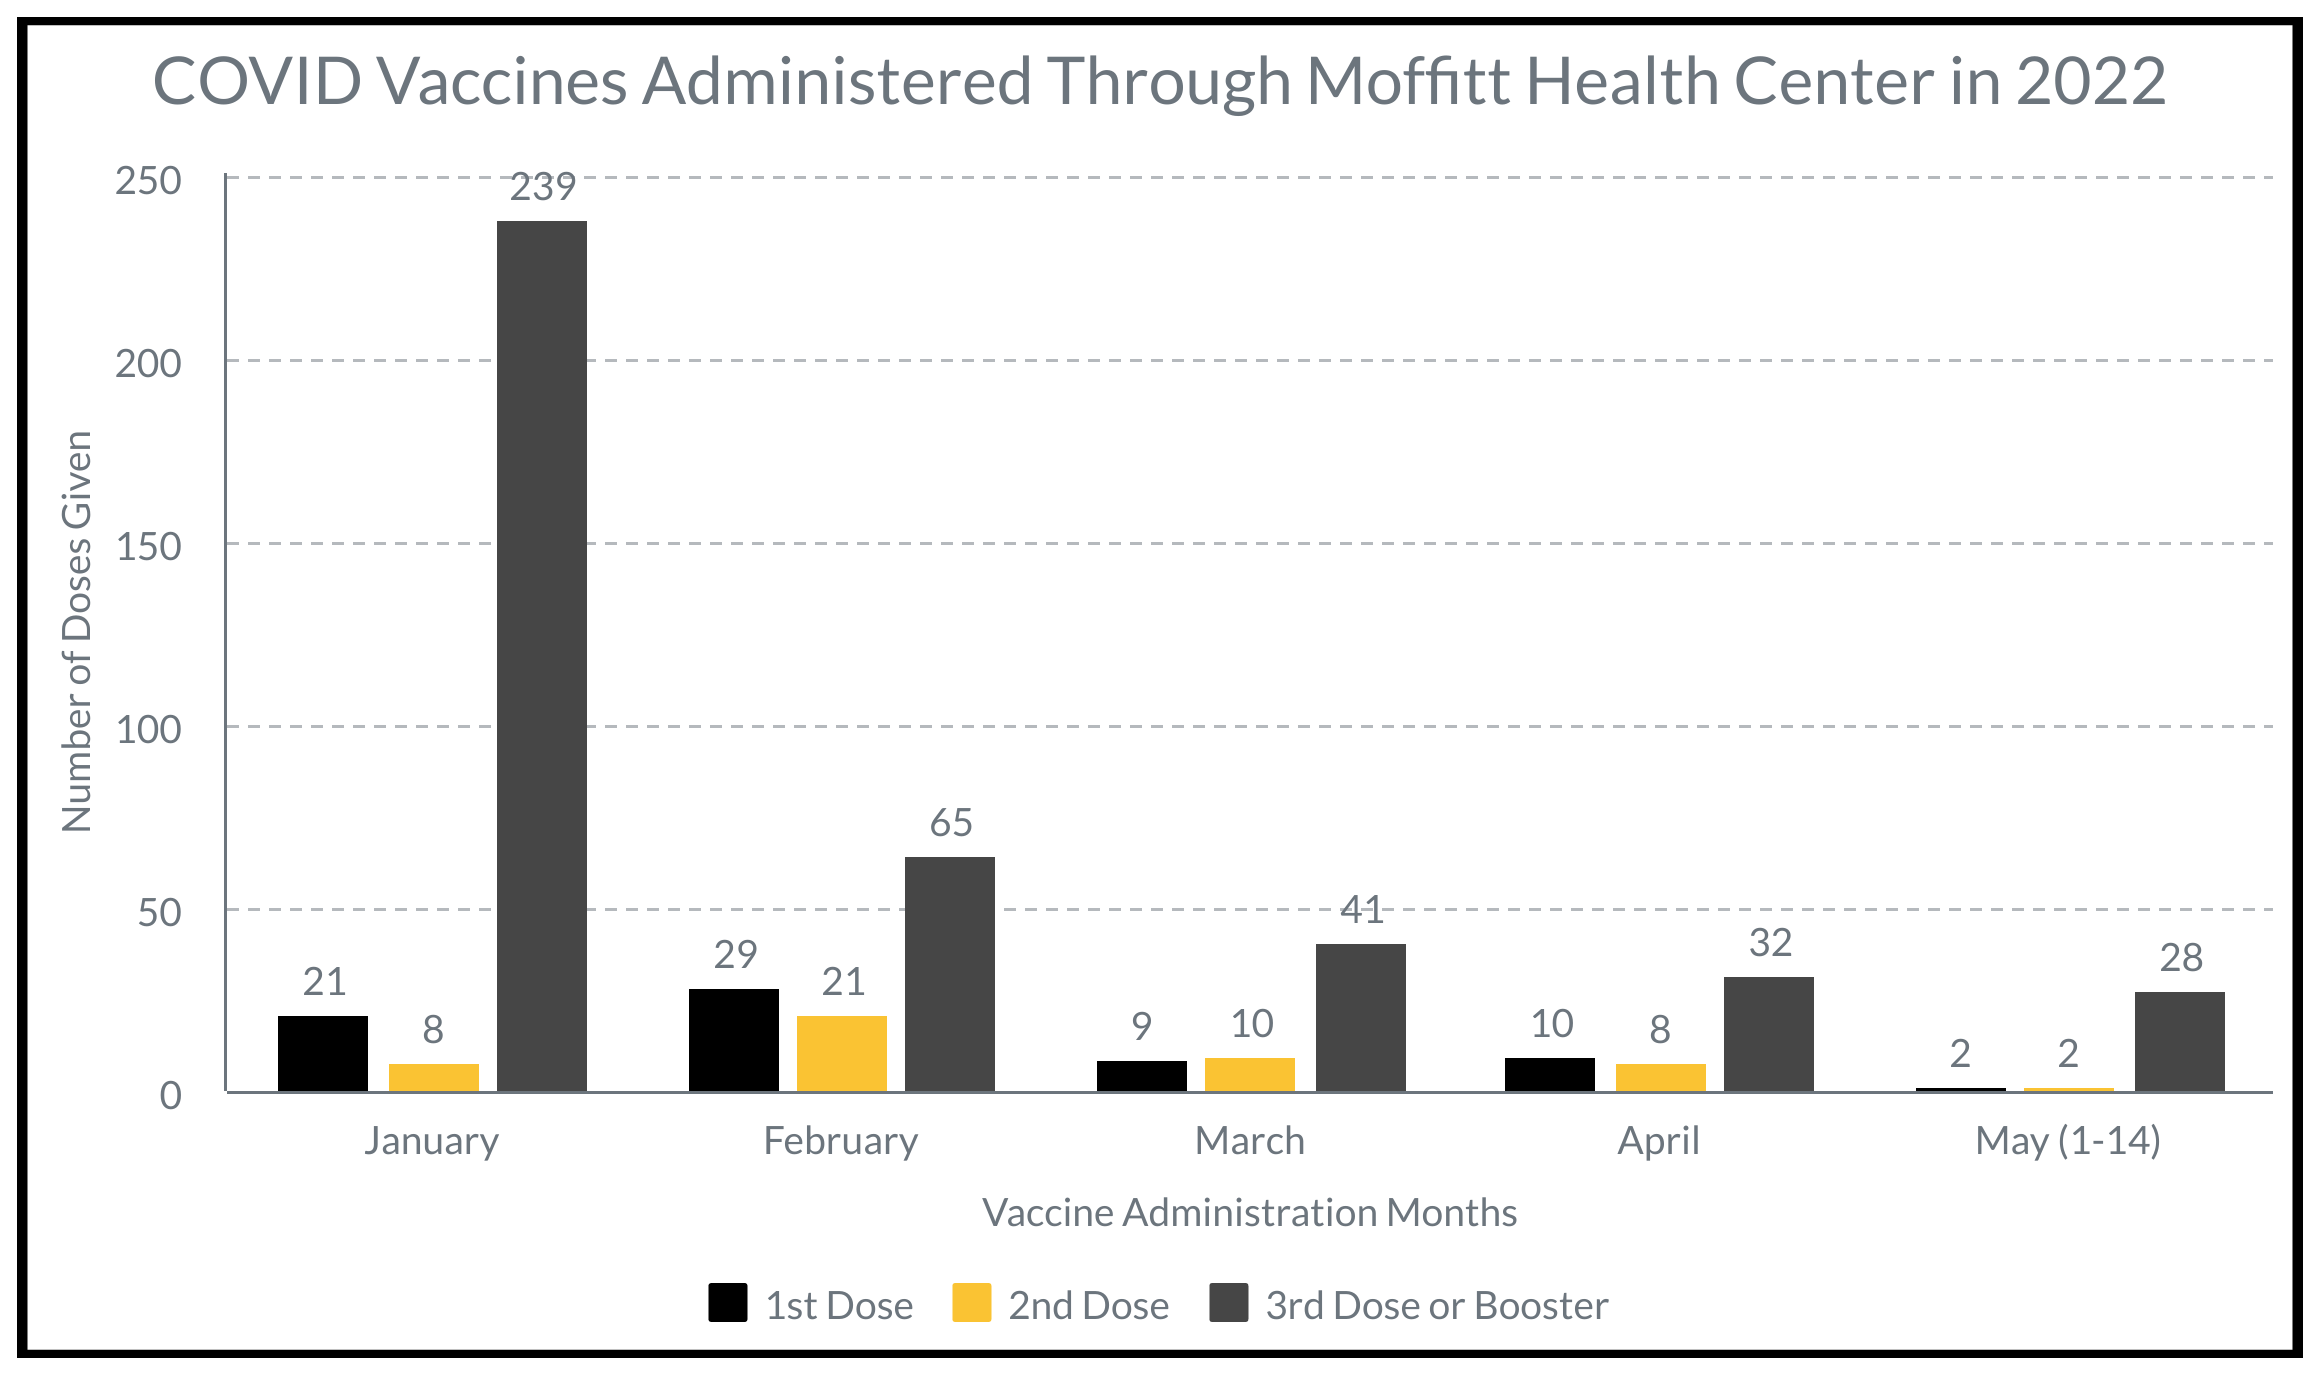 COVID Vaccines Administered Through Moffitt Health Center in 2022